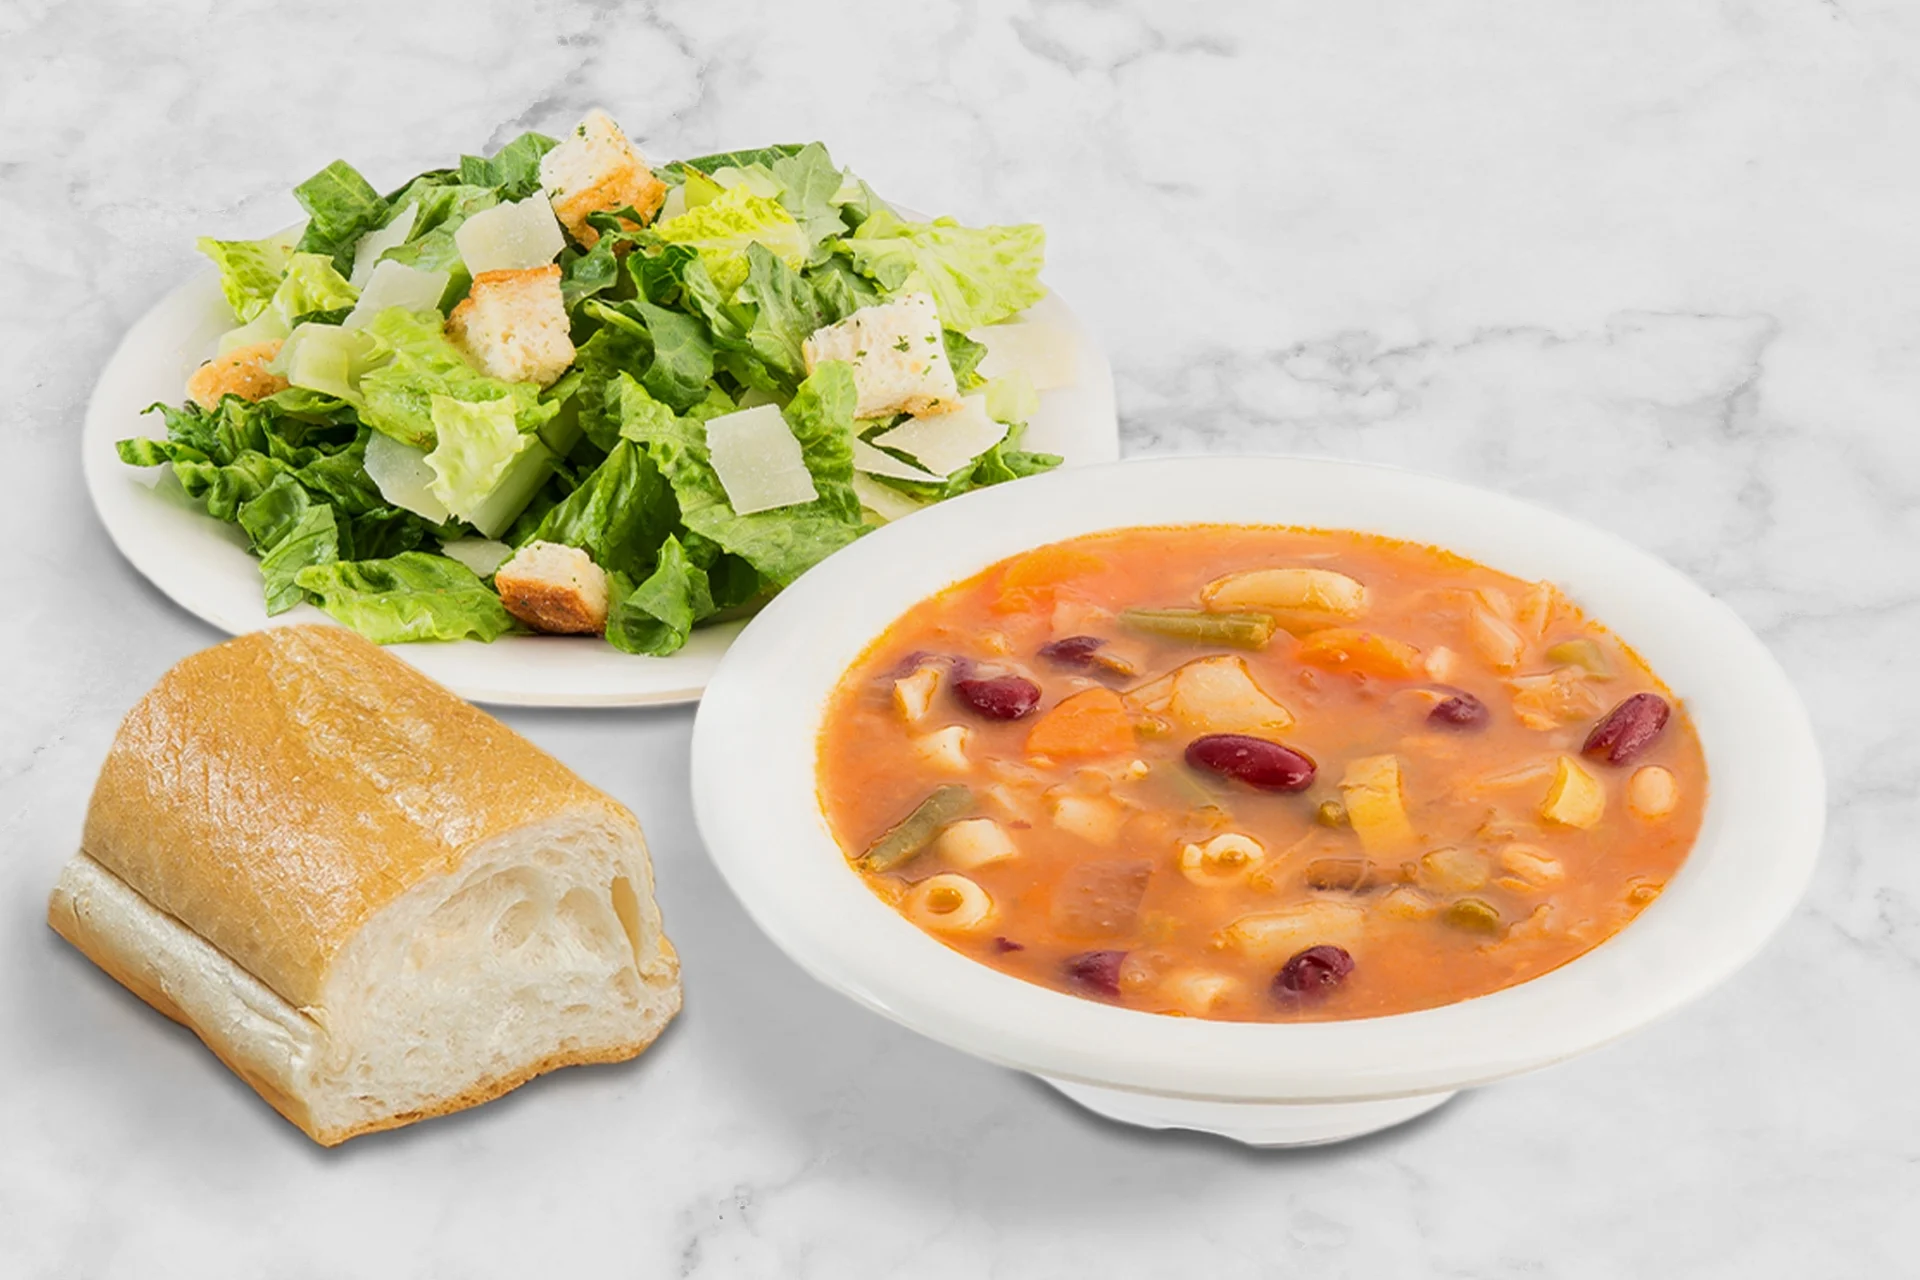 A bowl of soup, salad and bread on the table.